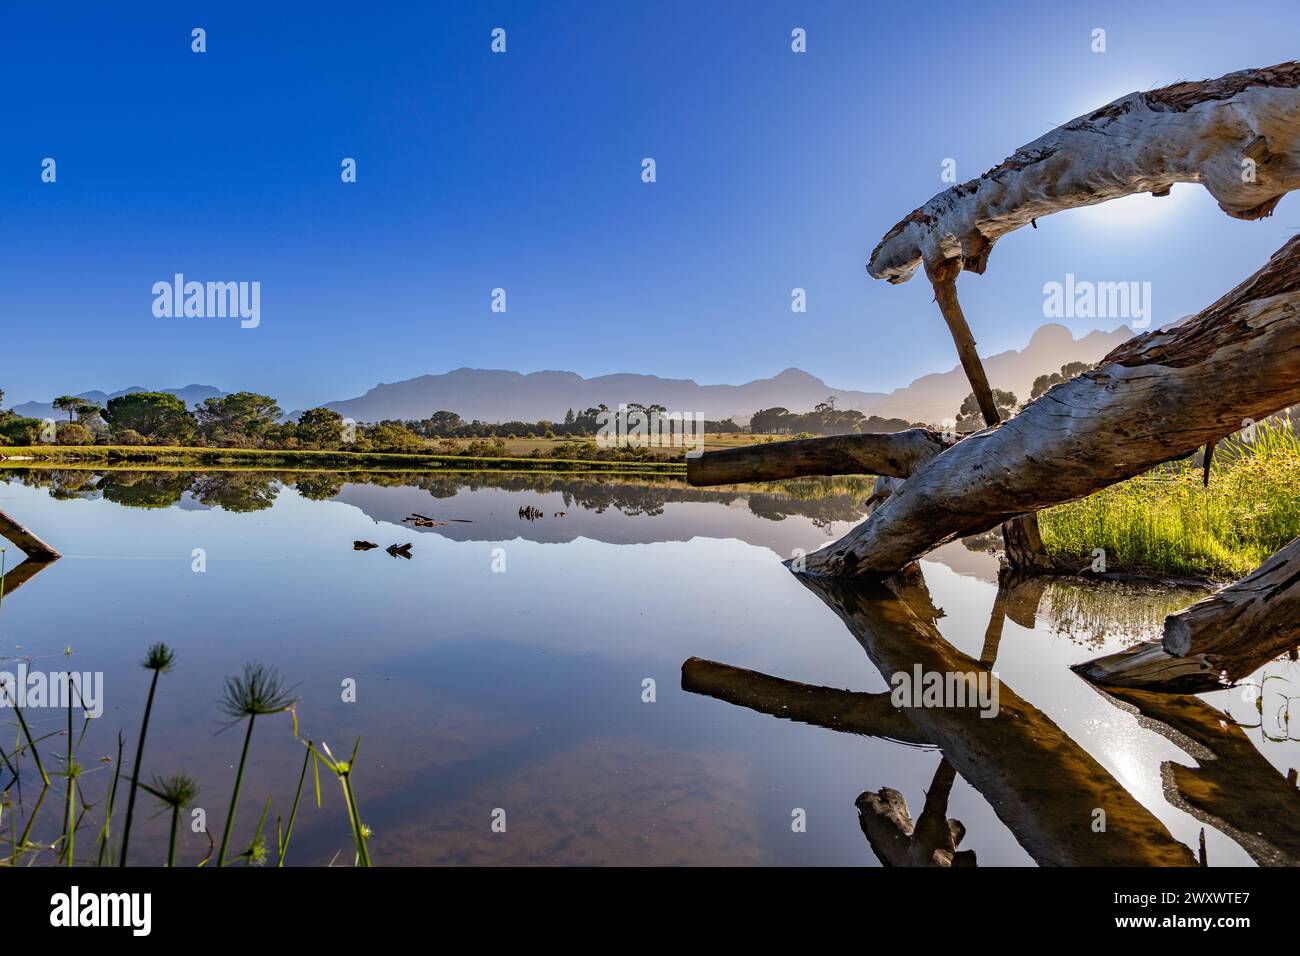 Tranquil rural scene with mountains in the background reflecting in the pond.  This is in the Stellenbosch wine region of South Africa. Stock Photo